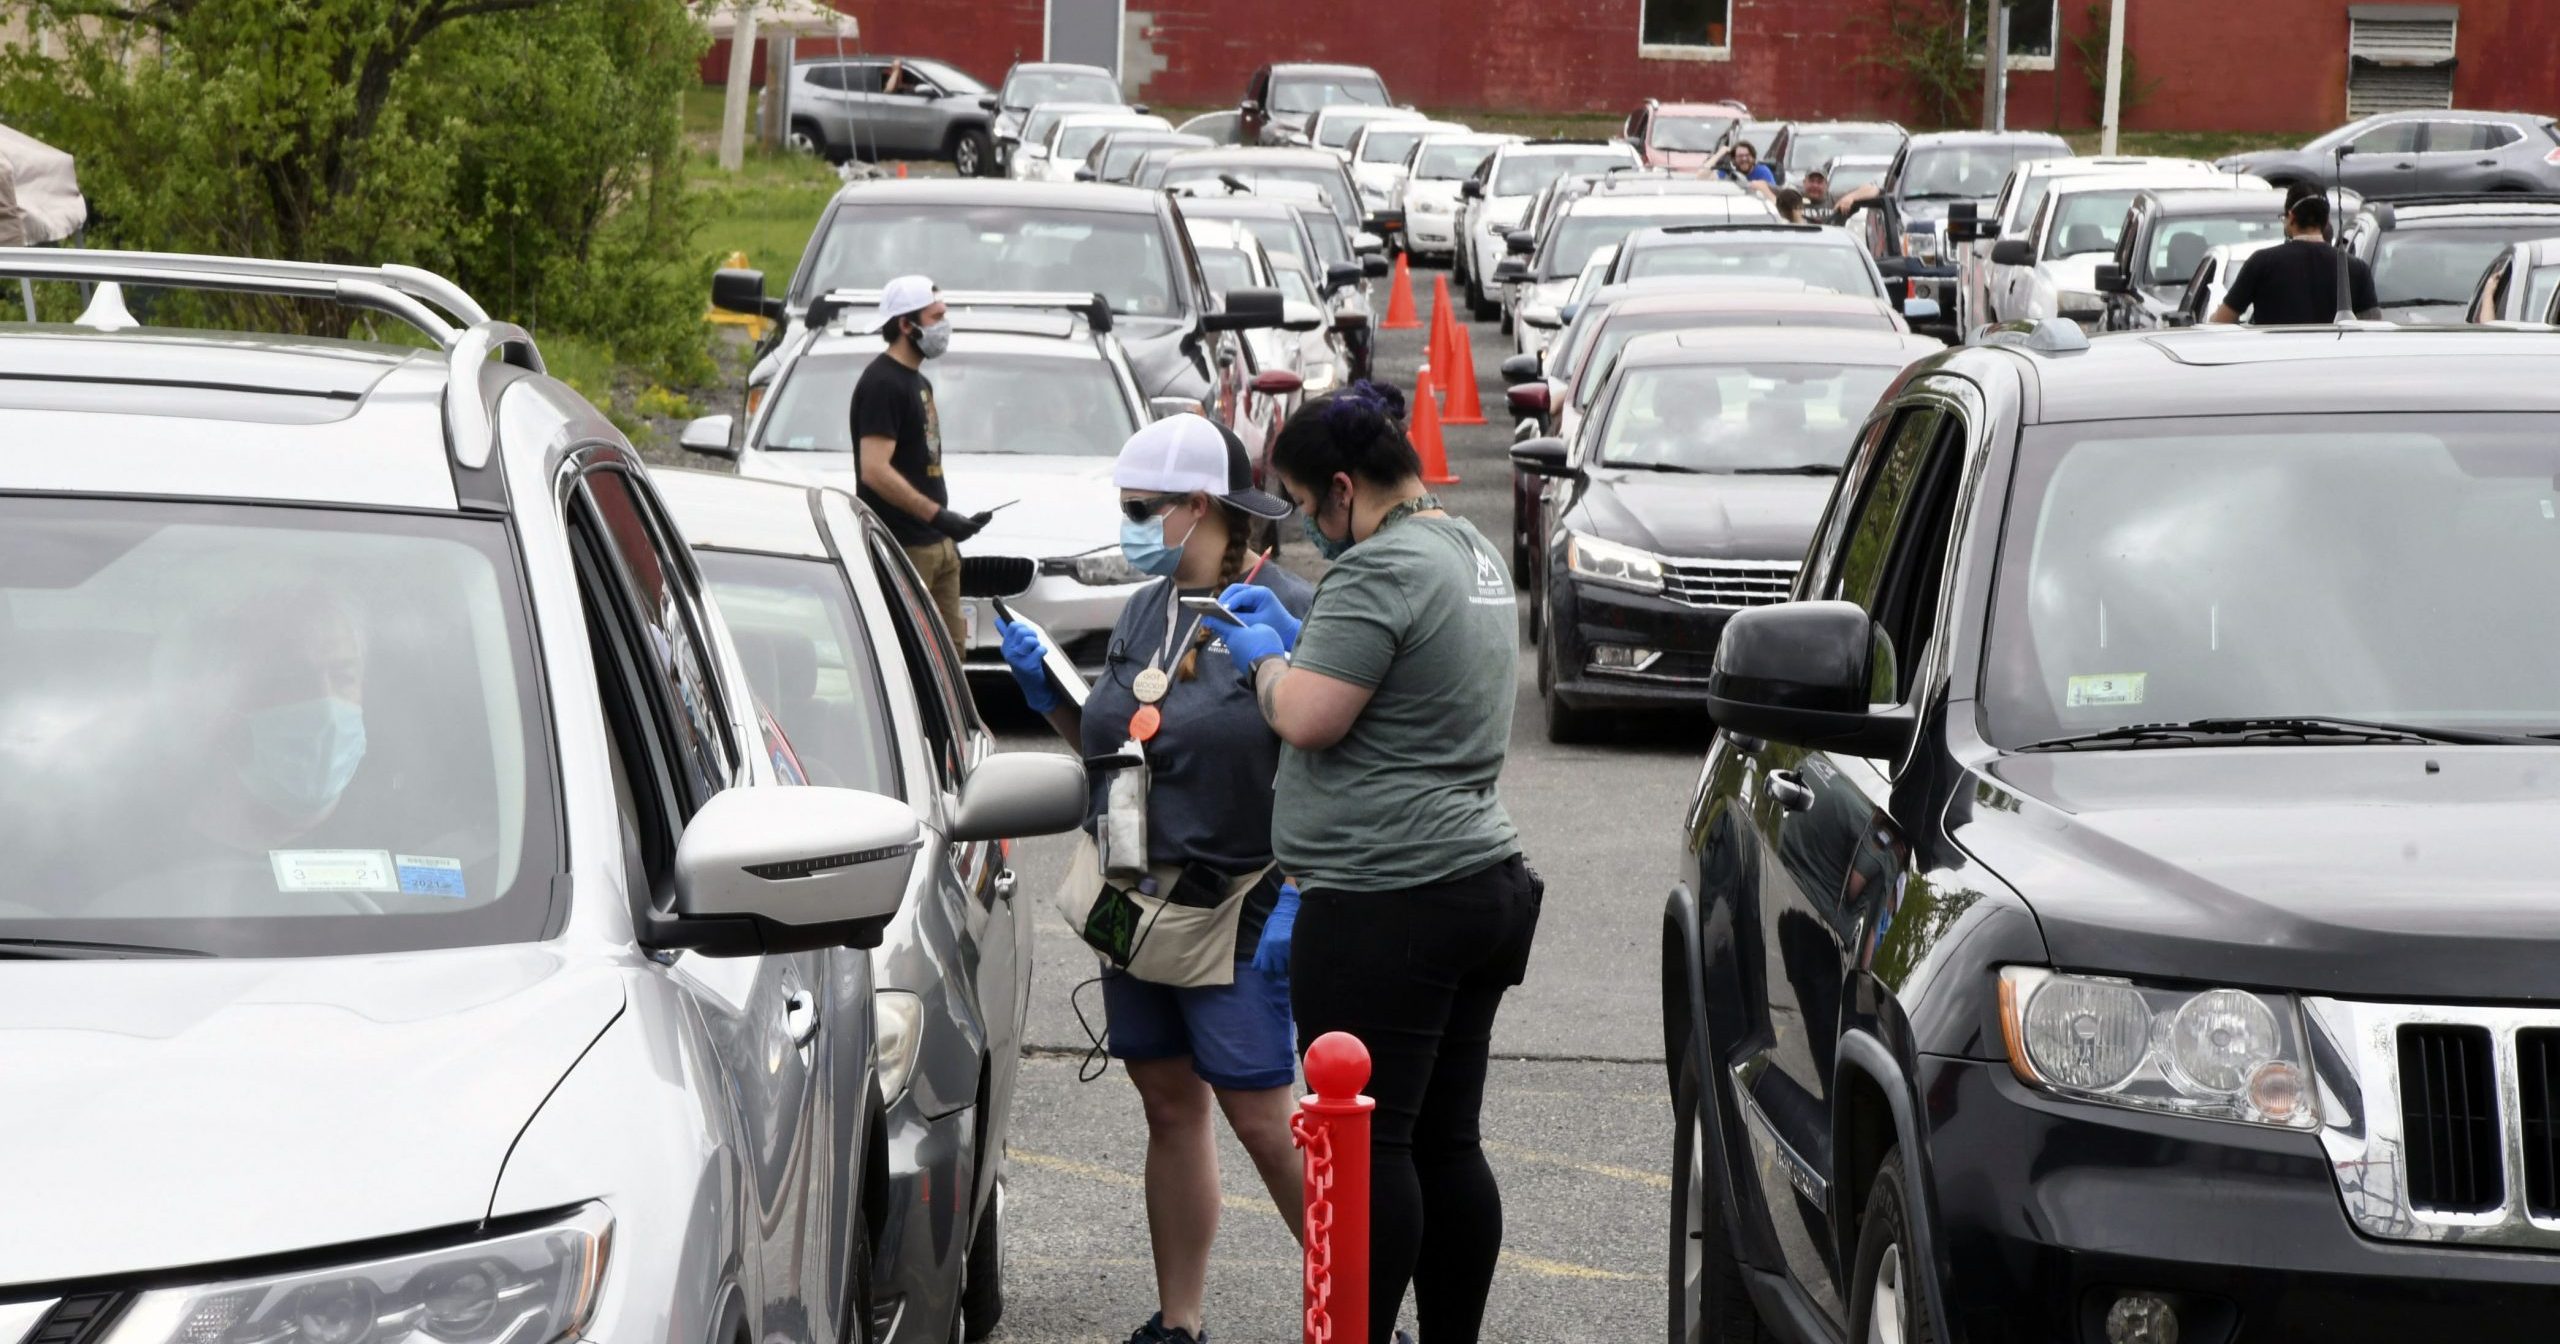 Amanda Toma and Ashley Brodeur work with customers in the parking lot of cannabis purveyor Berkshire Roots in Pittsfield, Massachusetts, on May 25, 2020.